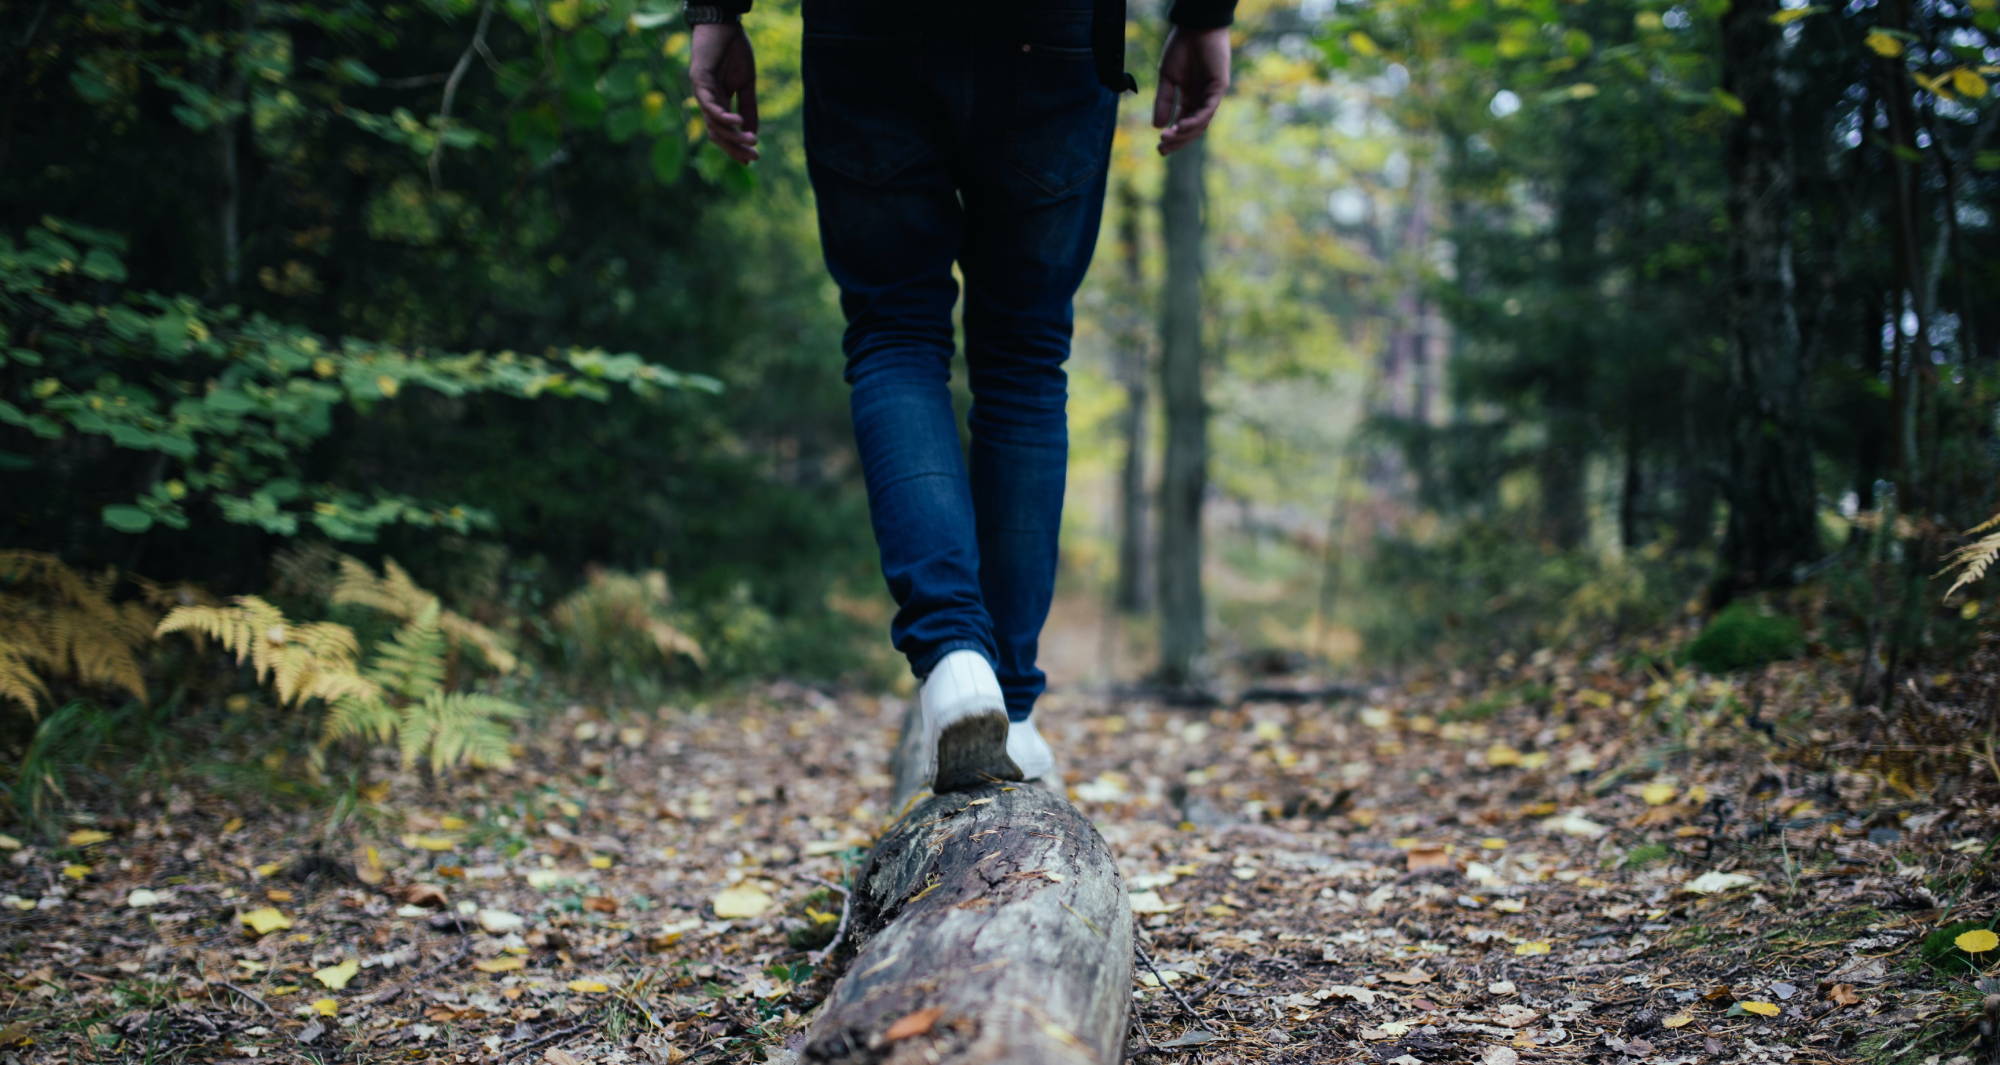  a person in blue jeans and white shoes walks on a log on a hiking trail with fallen leaves